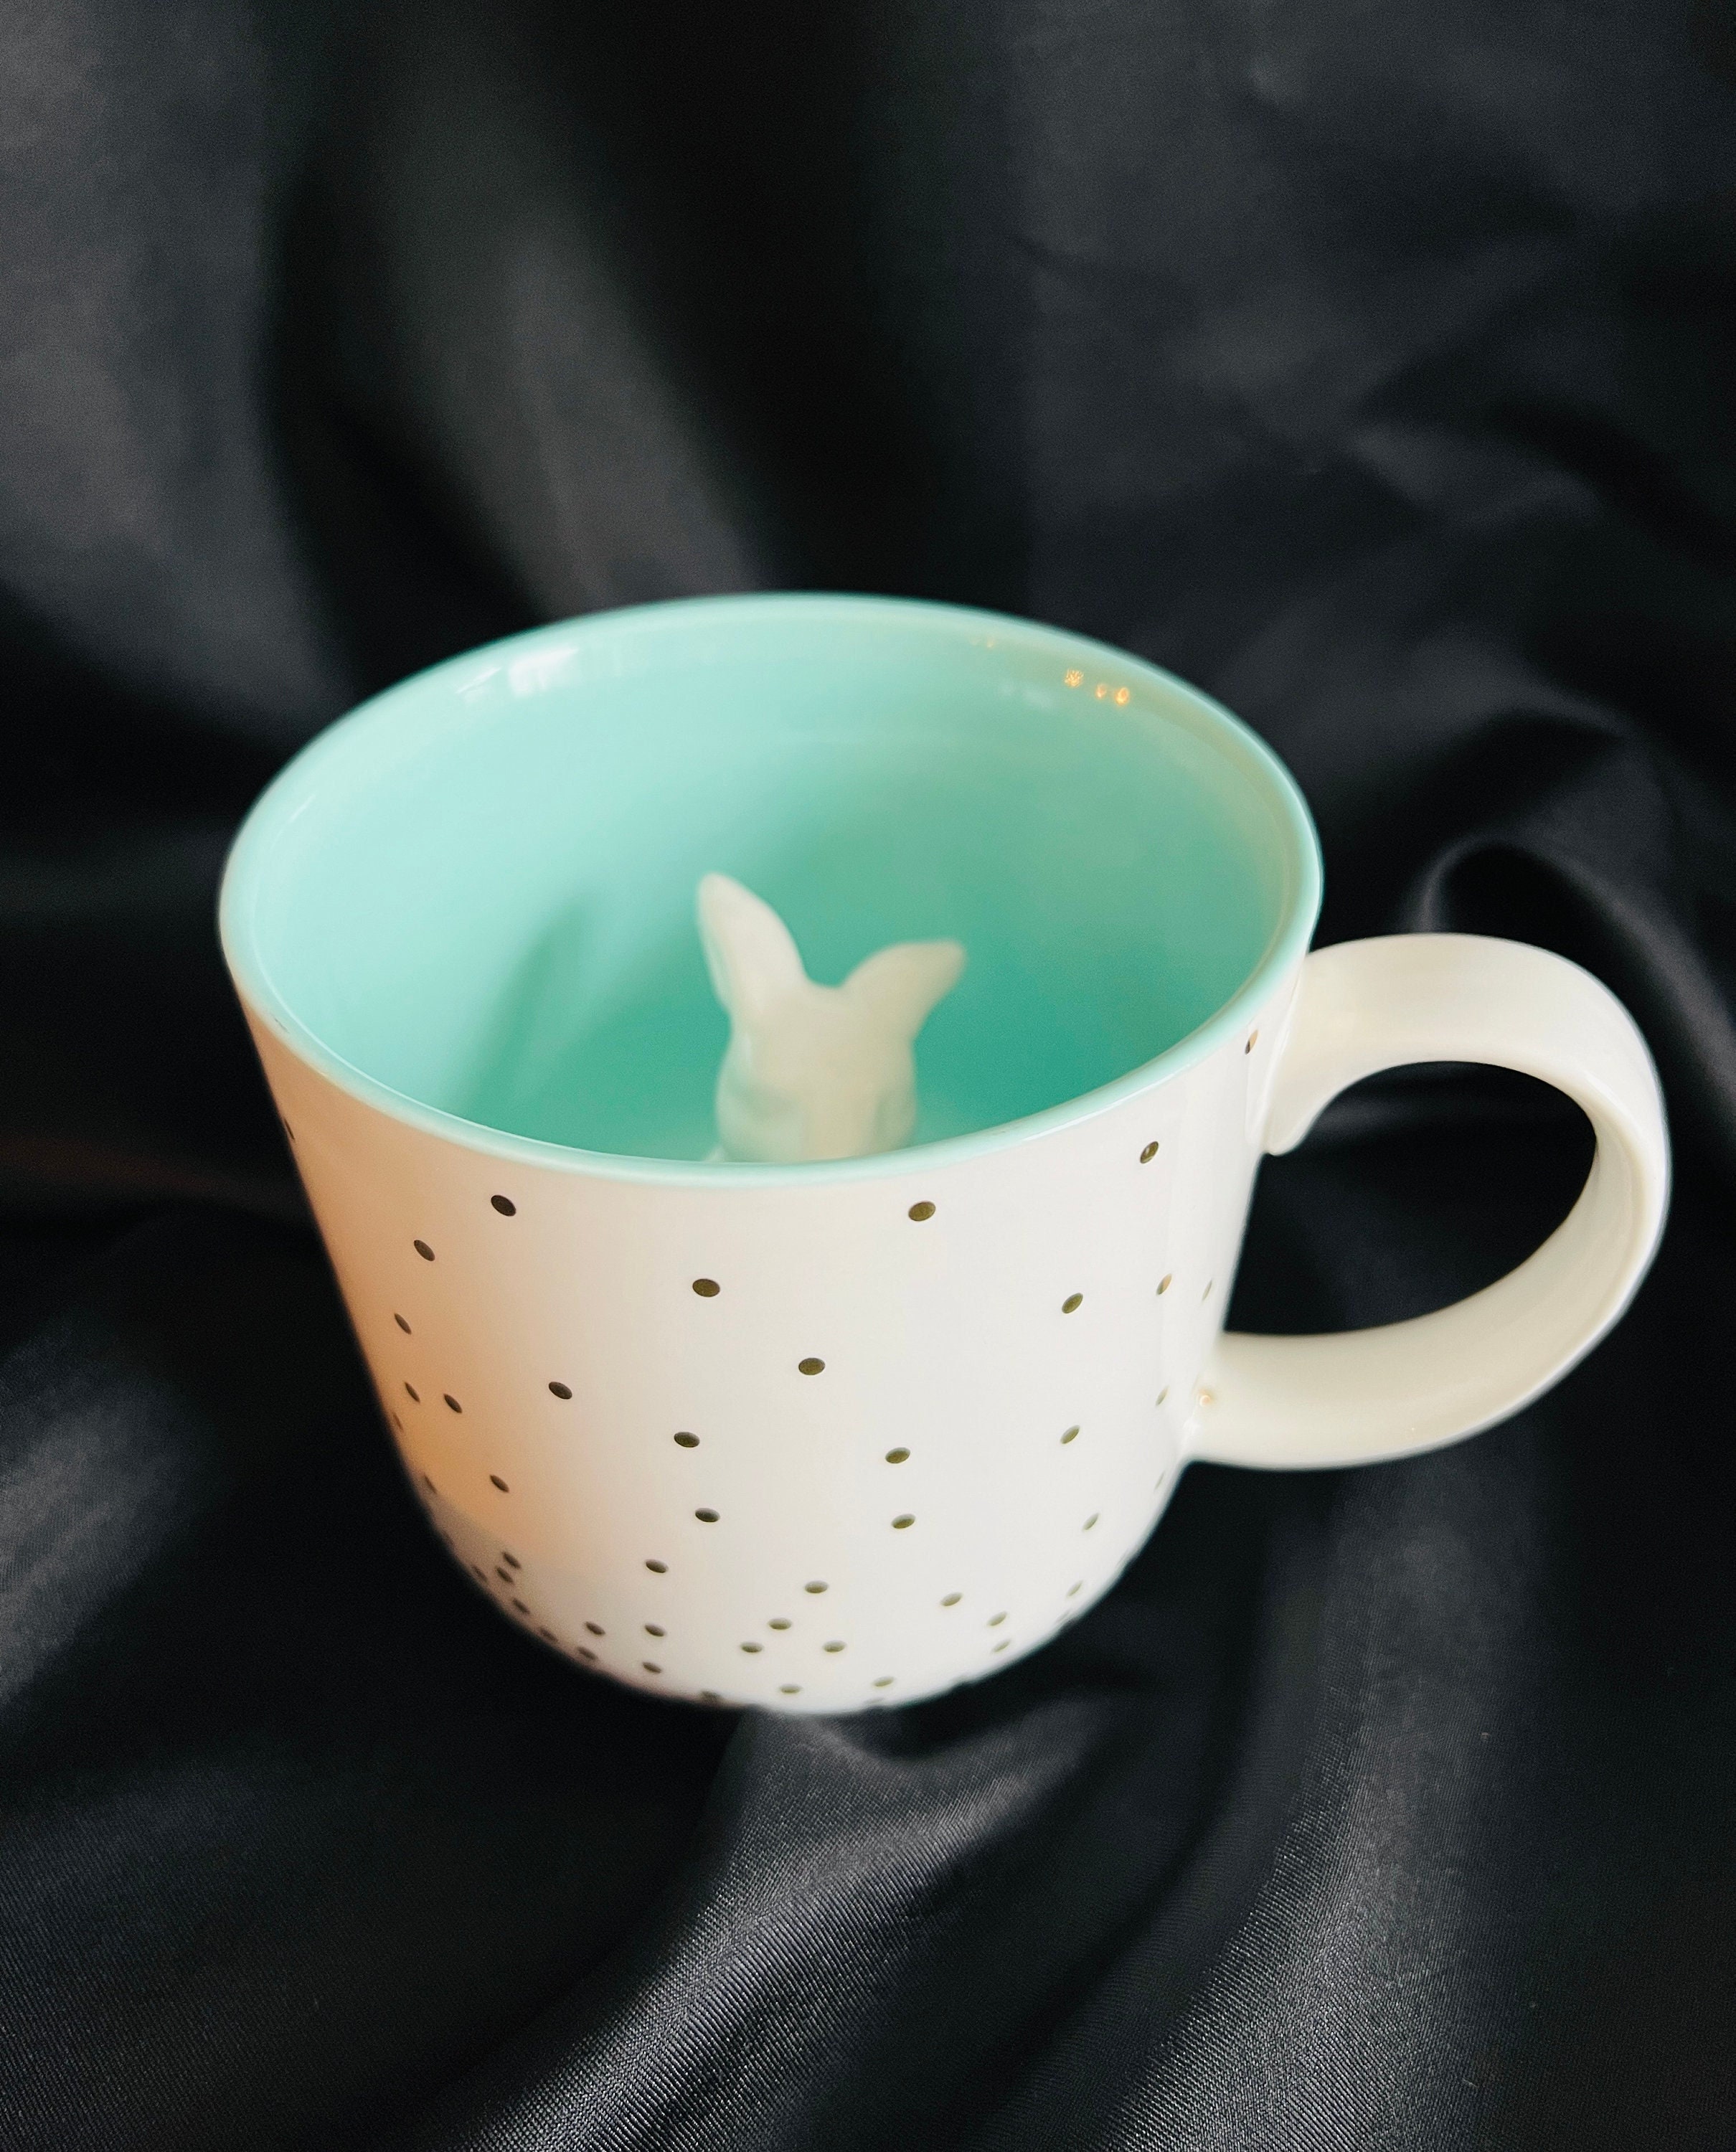 Creature Cups PENGUIN Ceramic Cup (11 Ounce, Ice Blue Exterior) - 3D Animal  Inside Mug - Birthday, H…See more Creature Cups PENGUIN Ceramic Cup (11